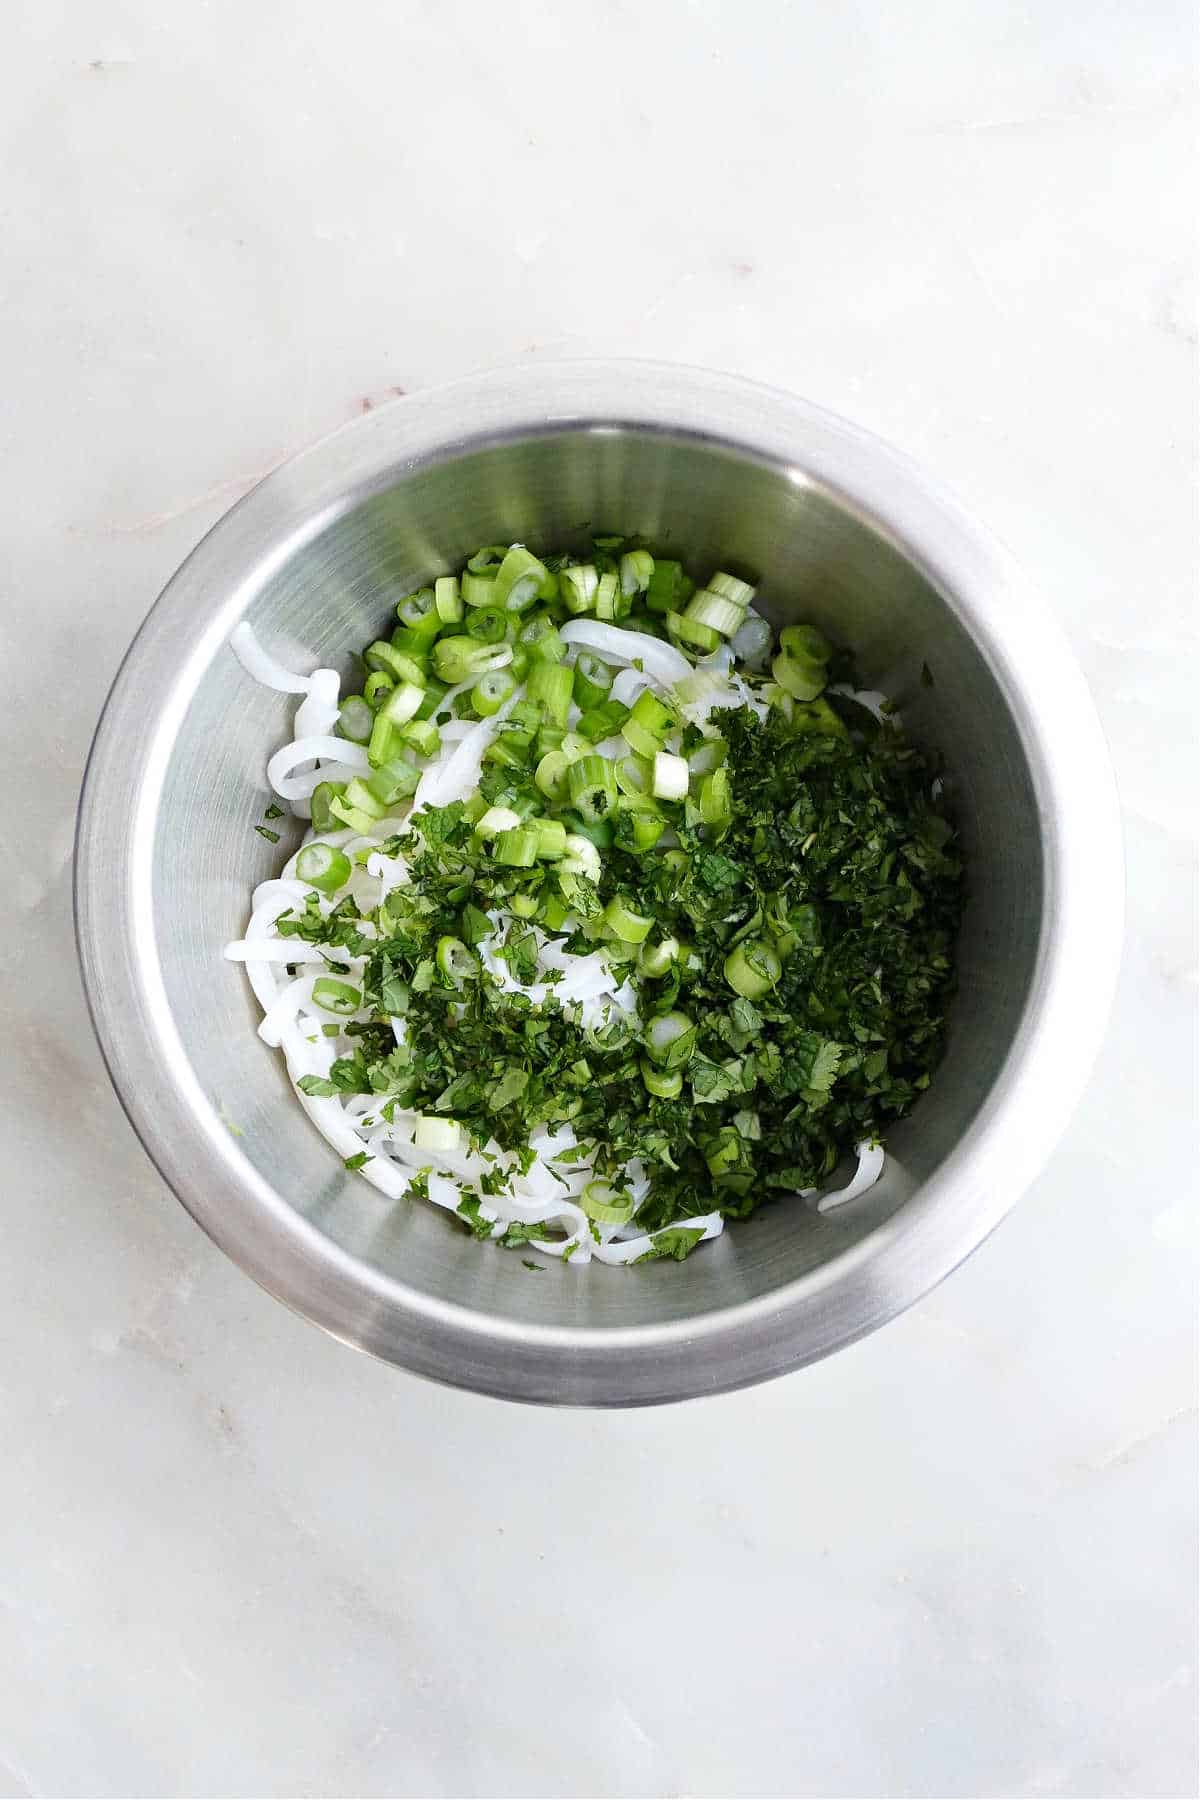 cooked rice noodles in a mixing bowl with chopped scallions and herbs